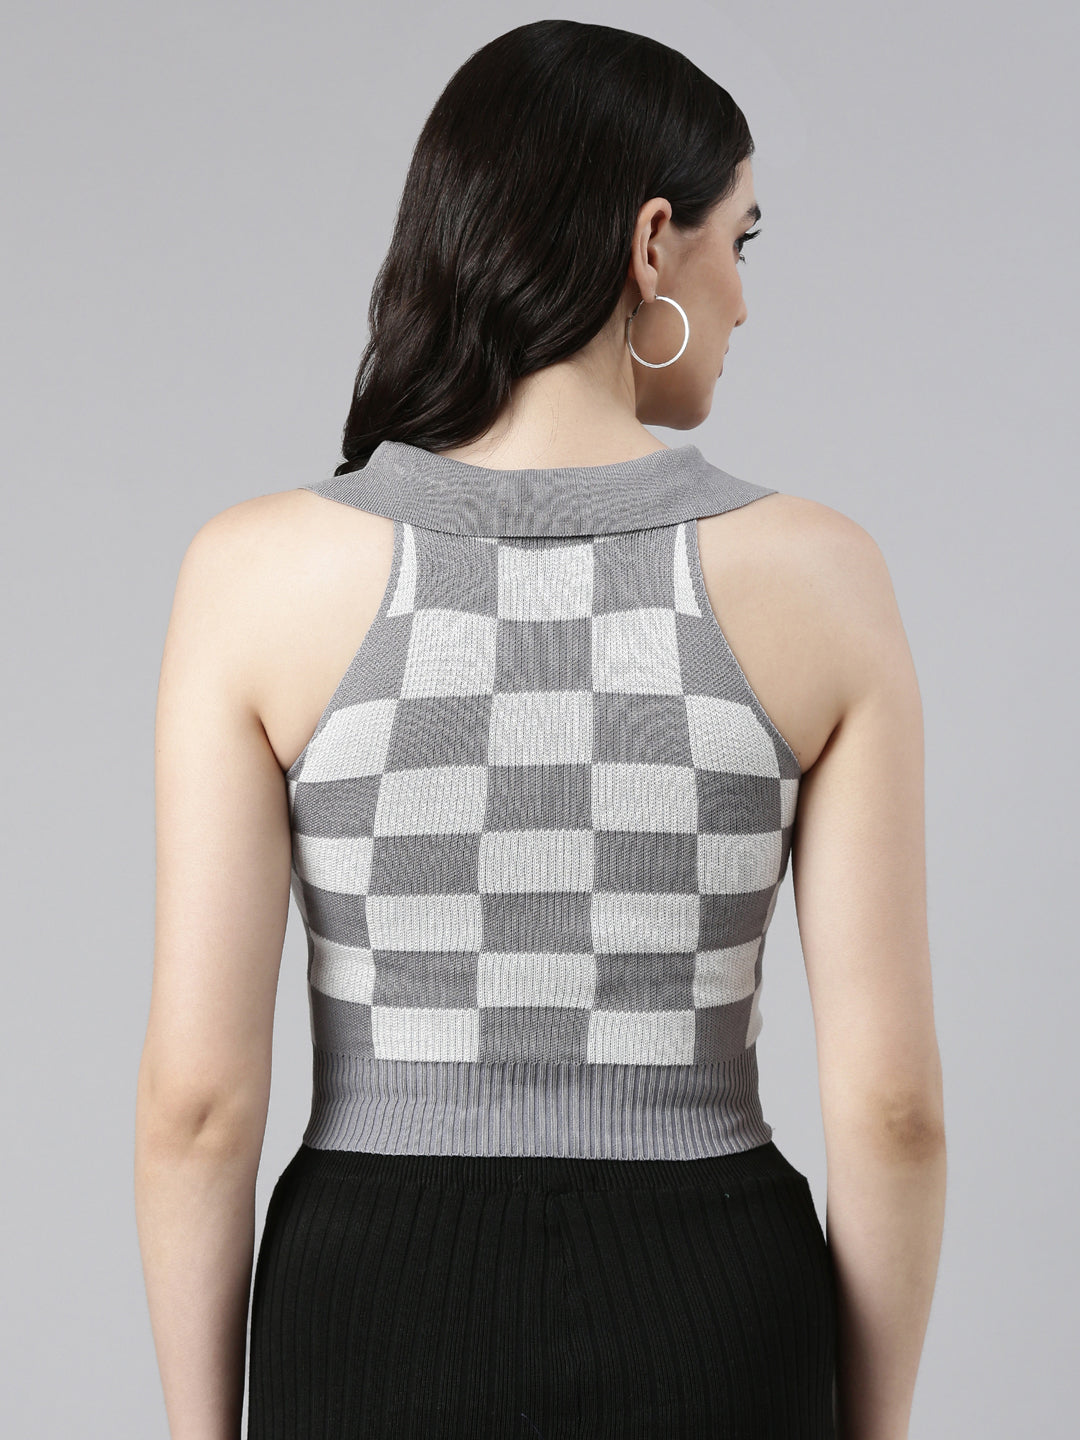 Above the Keyboard Collar Checked Grey Cinched Waist Crop Top